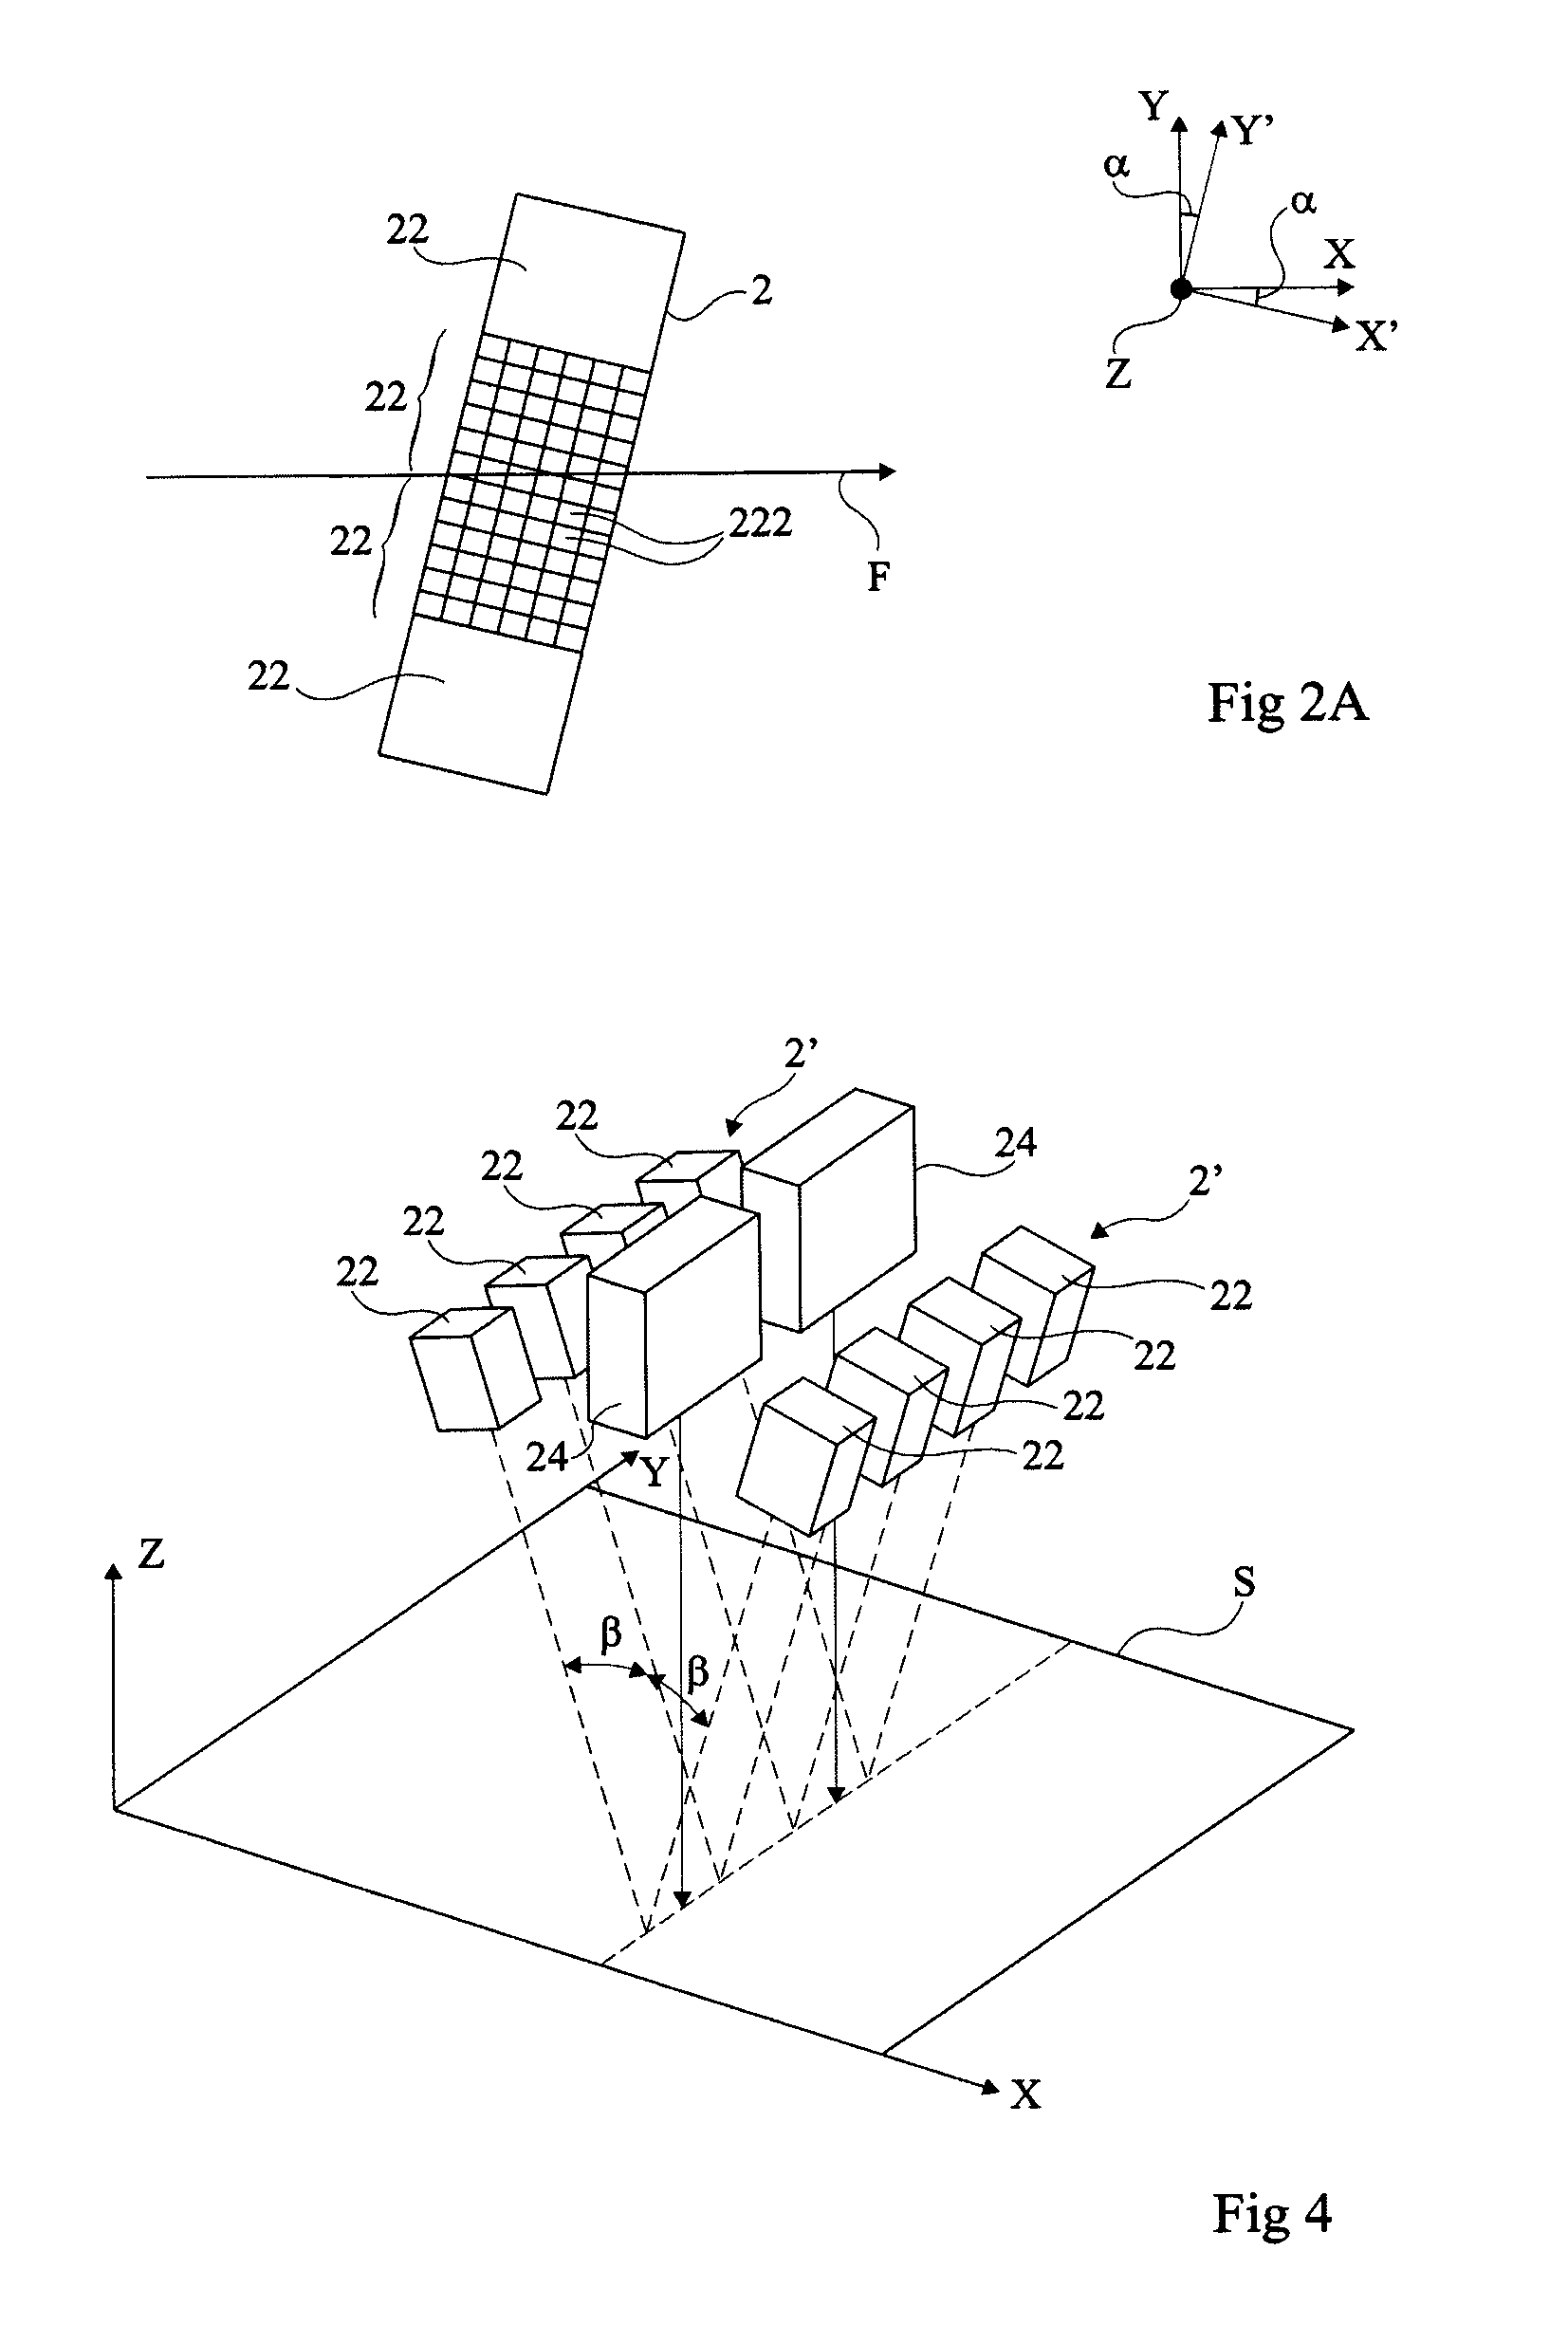 3D inspection using cameras and projectors with multiple-line patterns